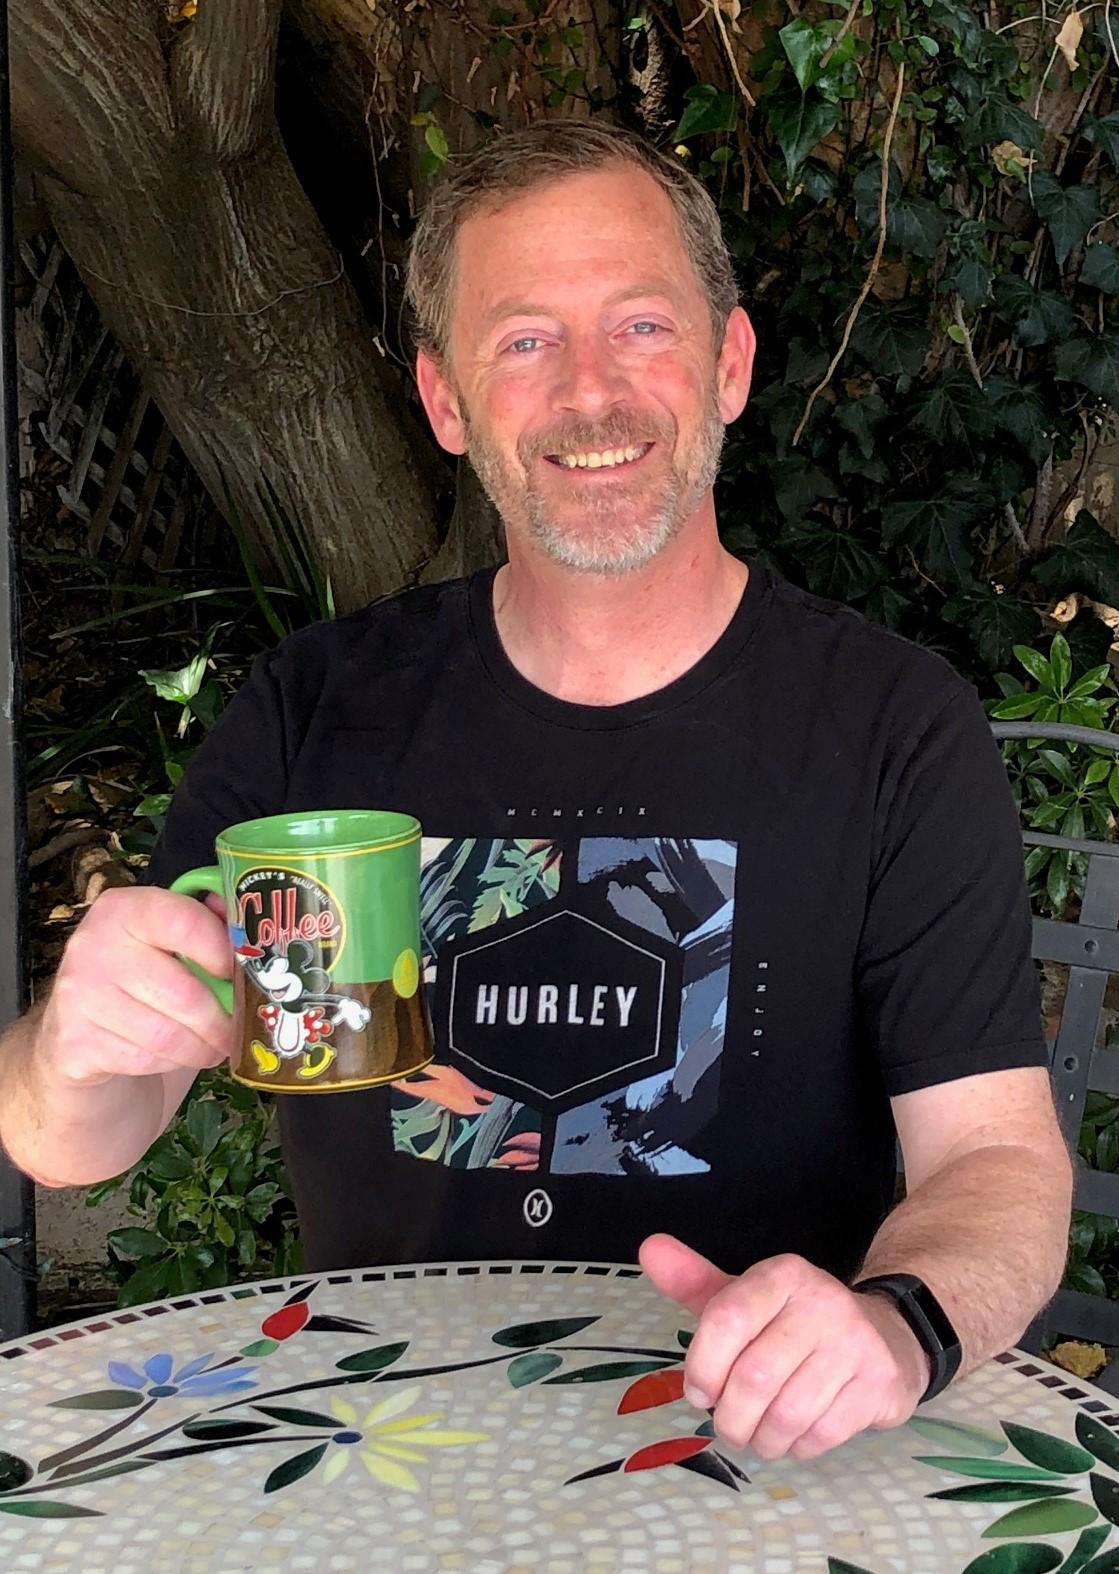 Profile picture of Mr. Caldwell holding a coffee cup